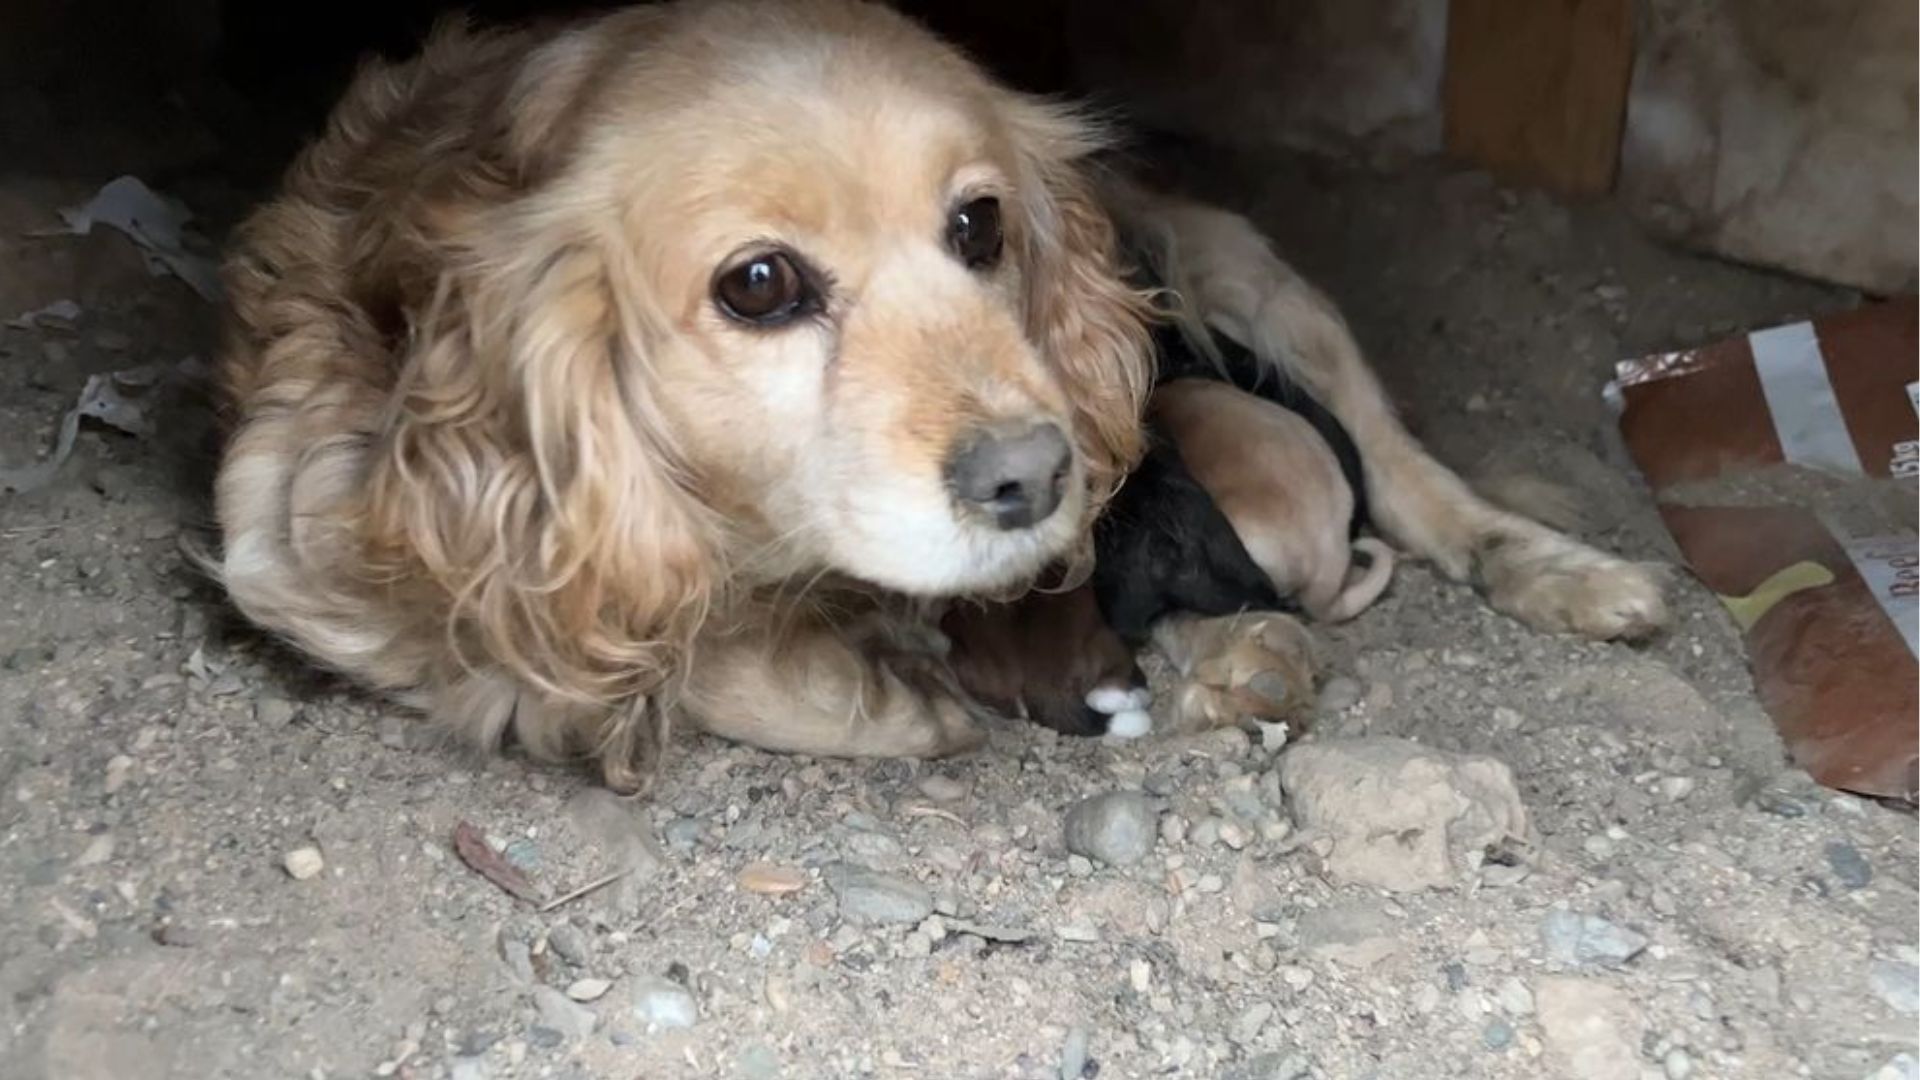 Heartless Owner Abandoned A Sweet Dog Family Because He Didn’t Like Their Breed